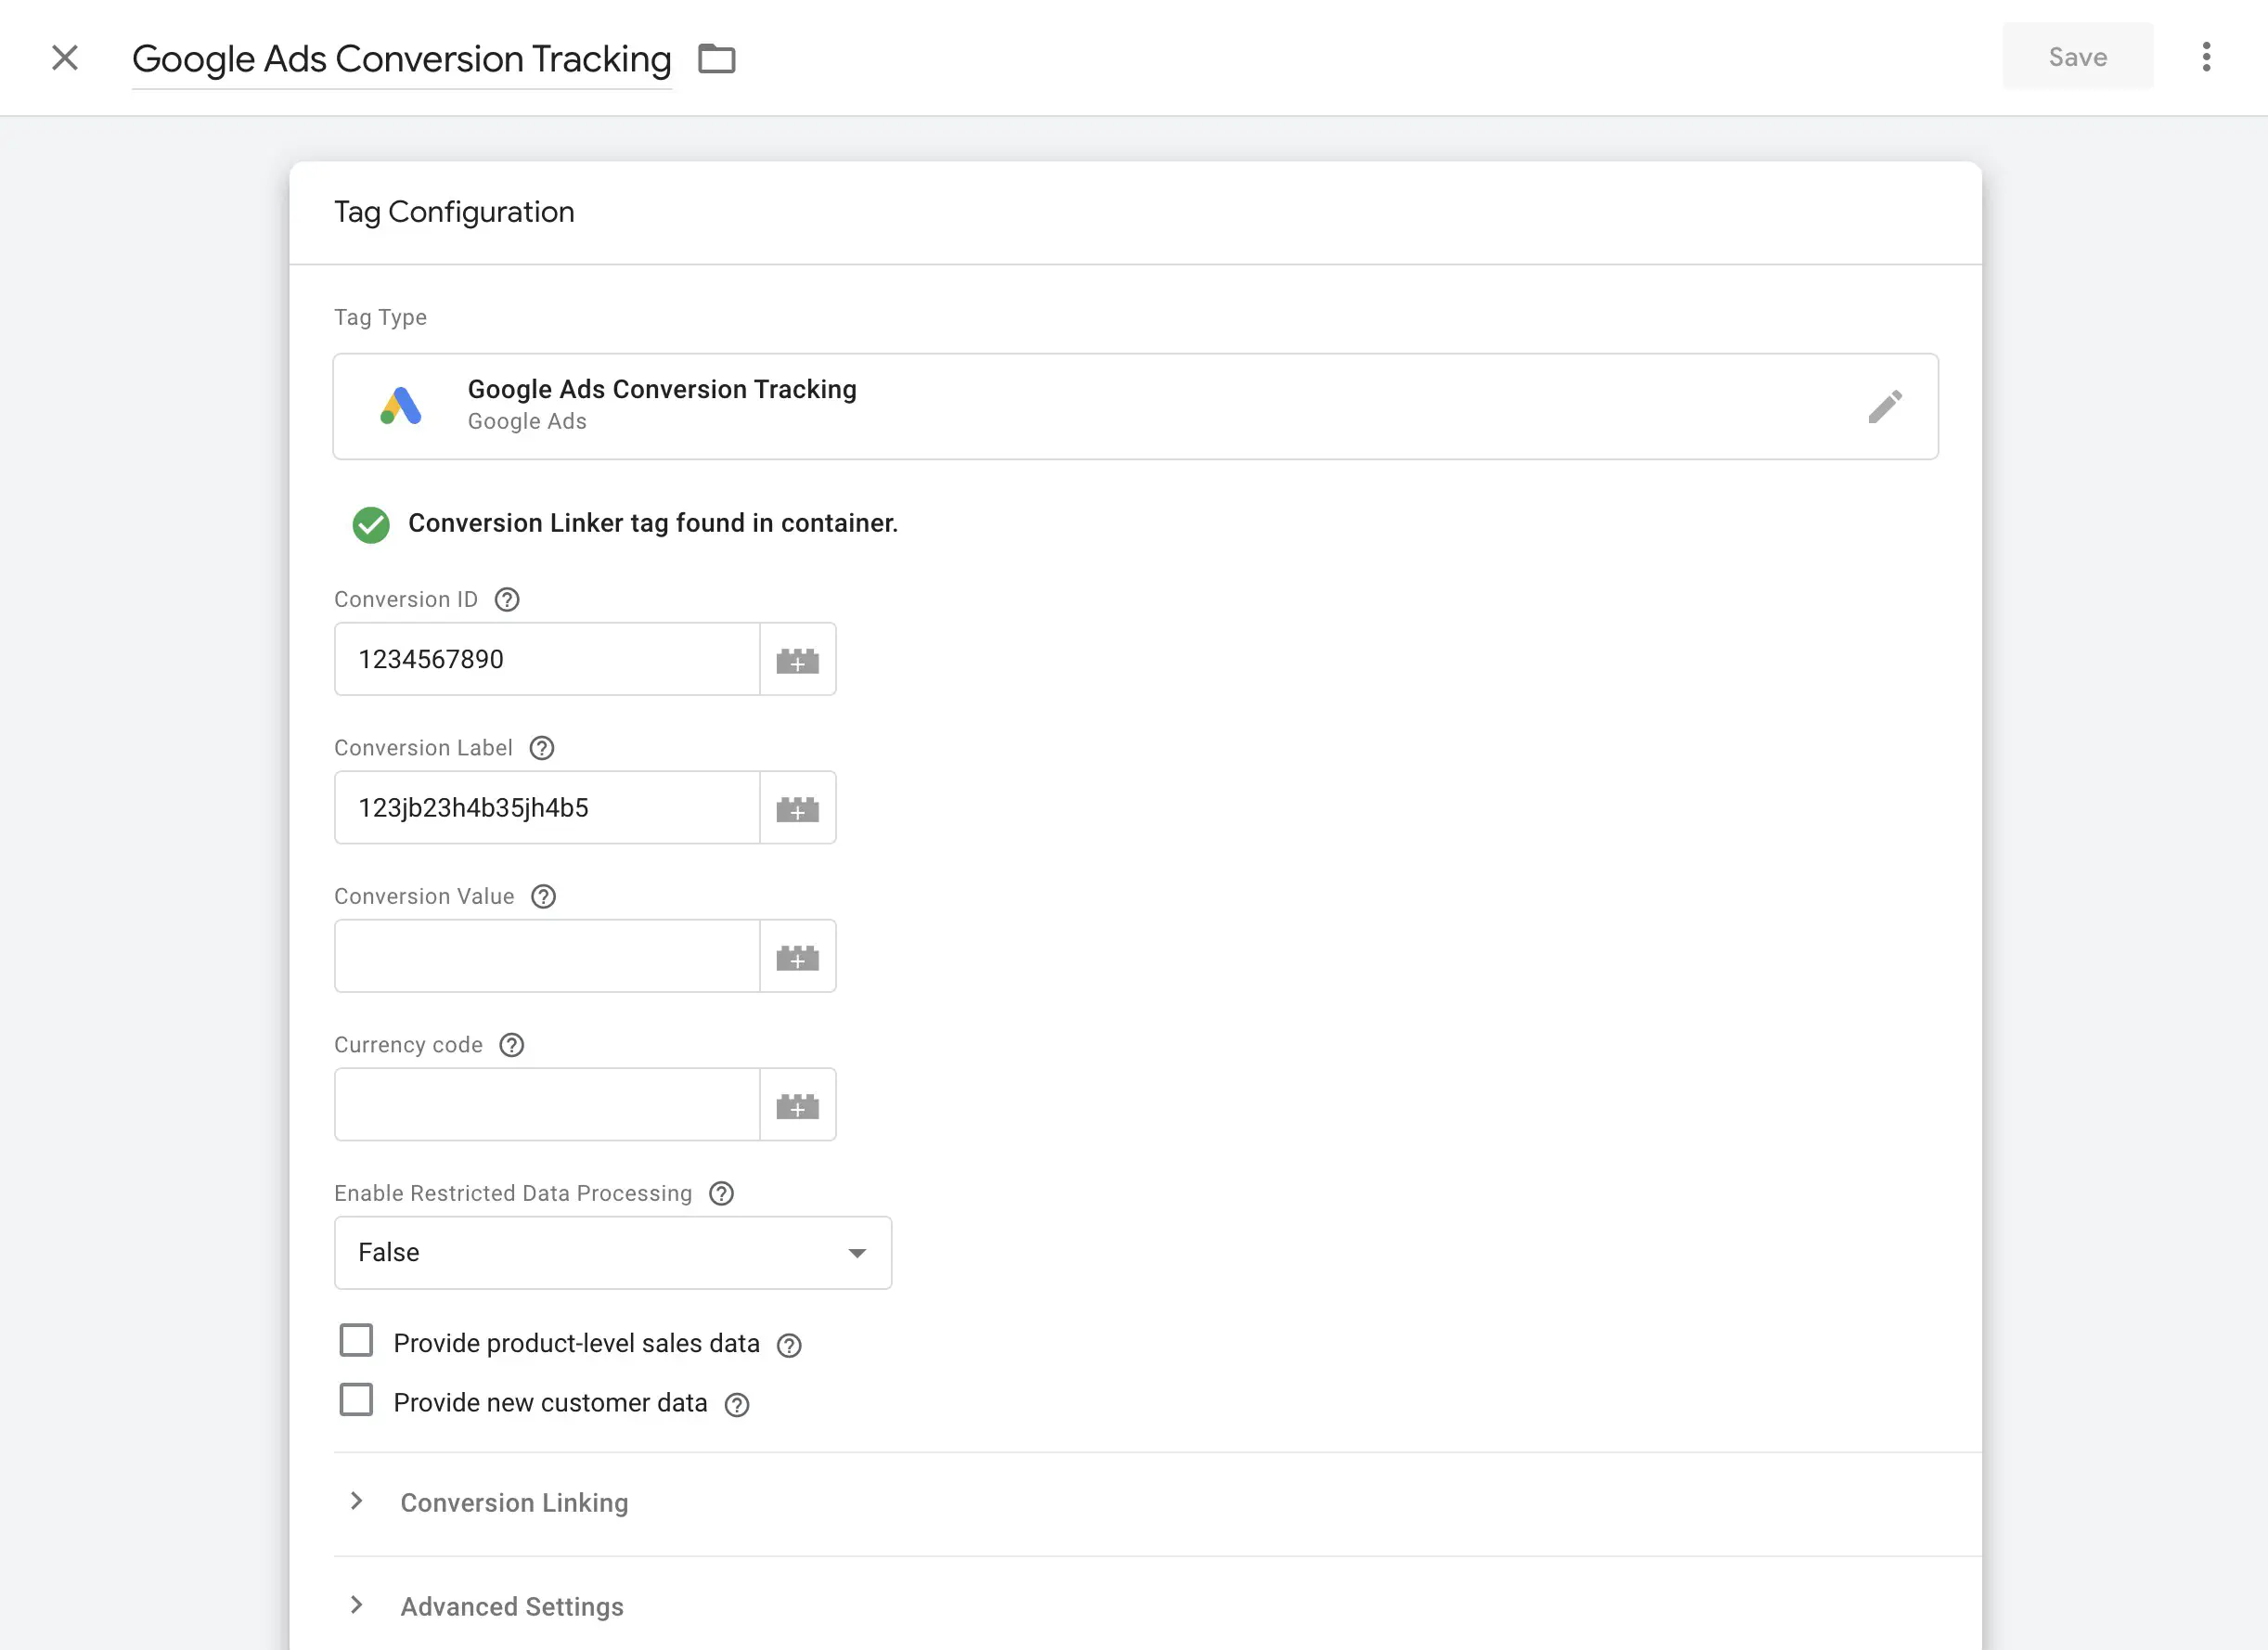 Google Ads conversion tracking tag configuration